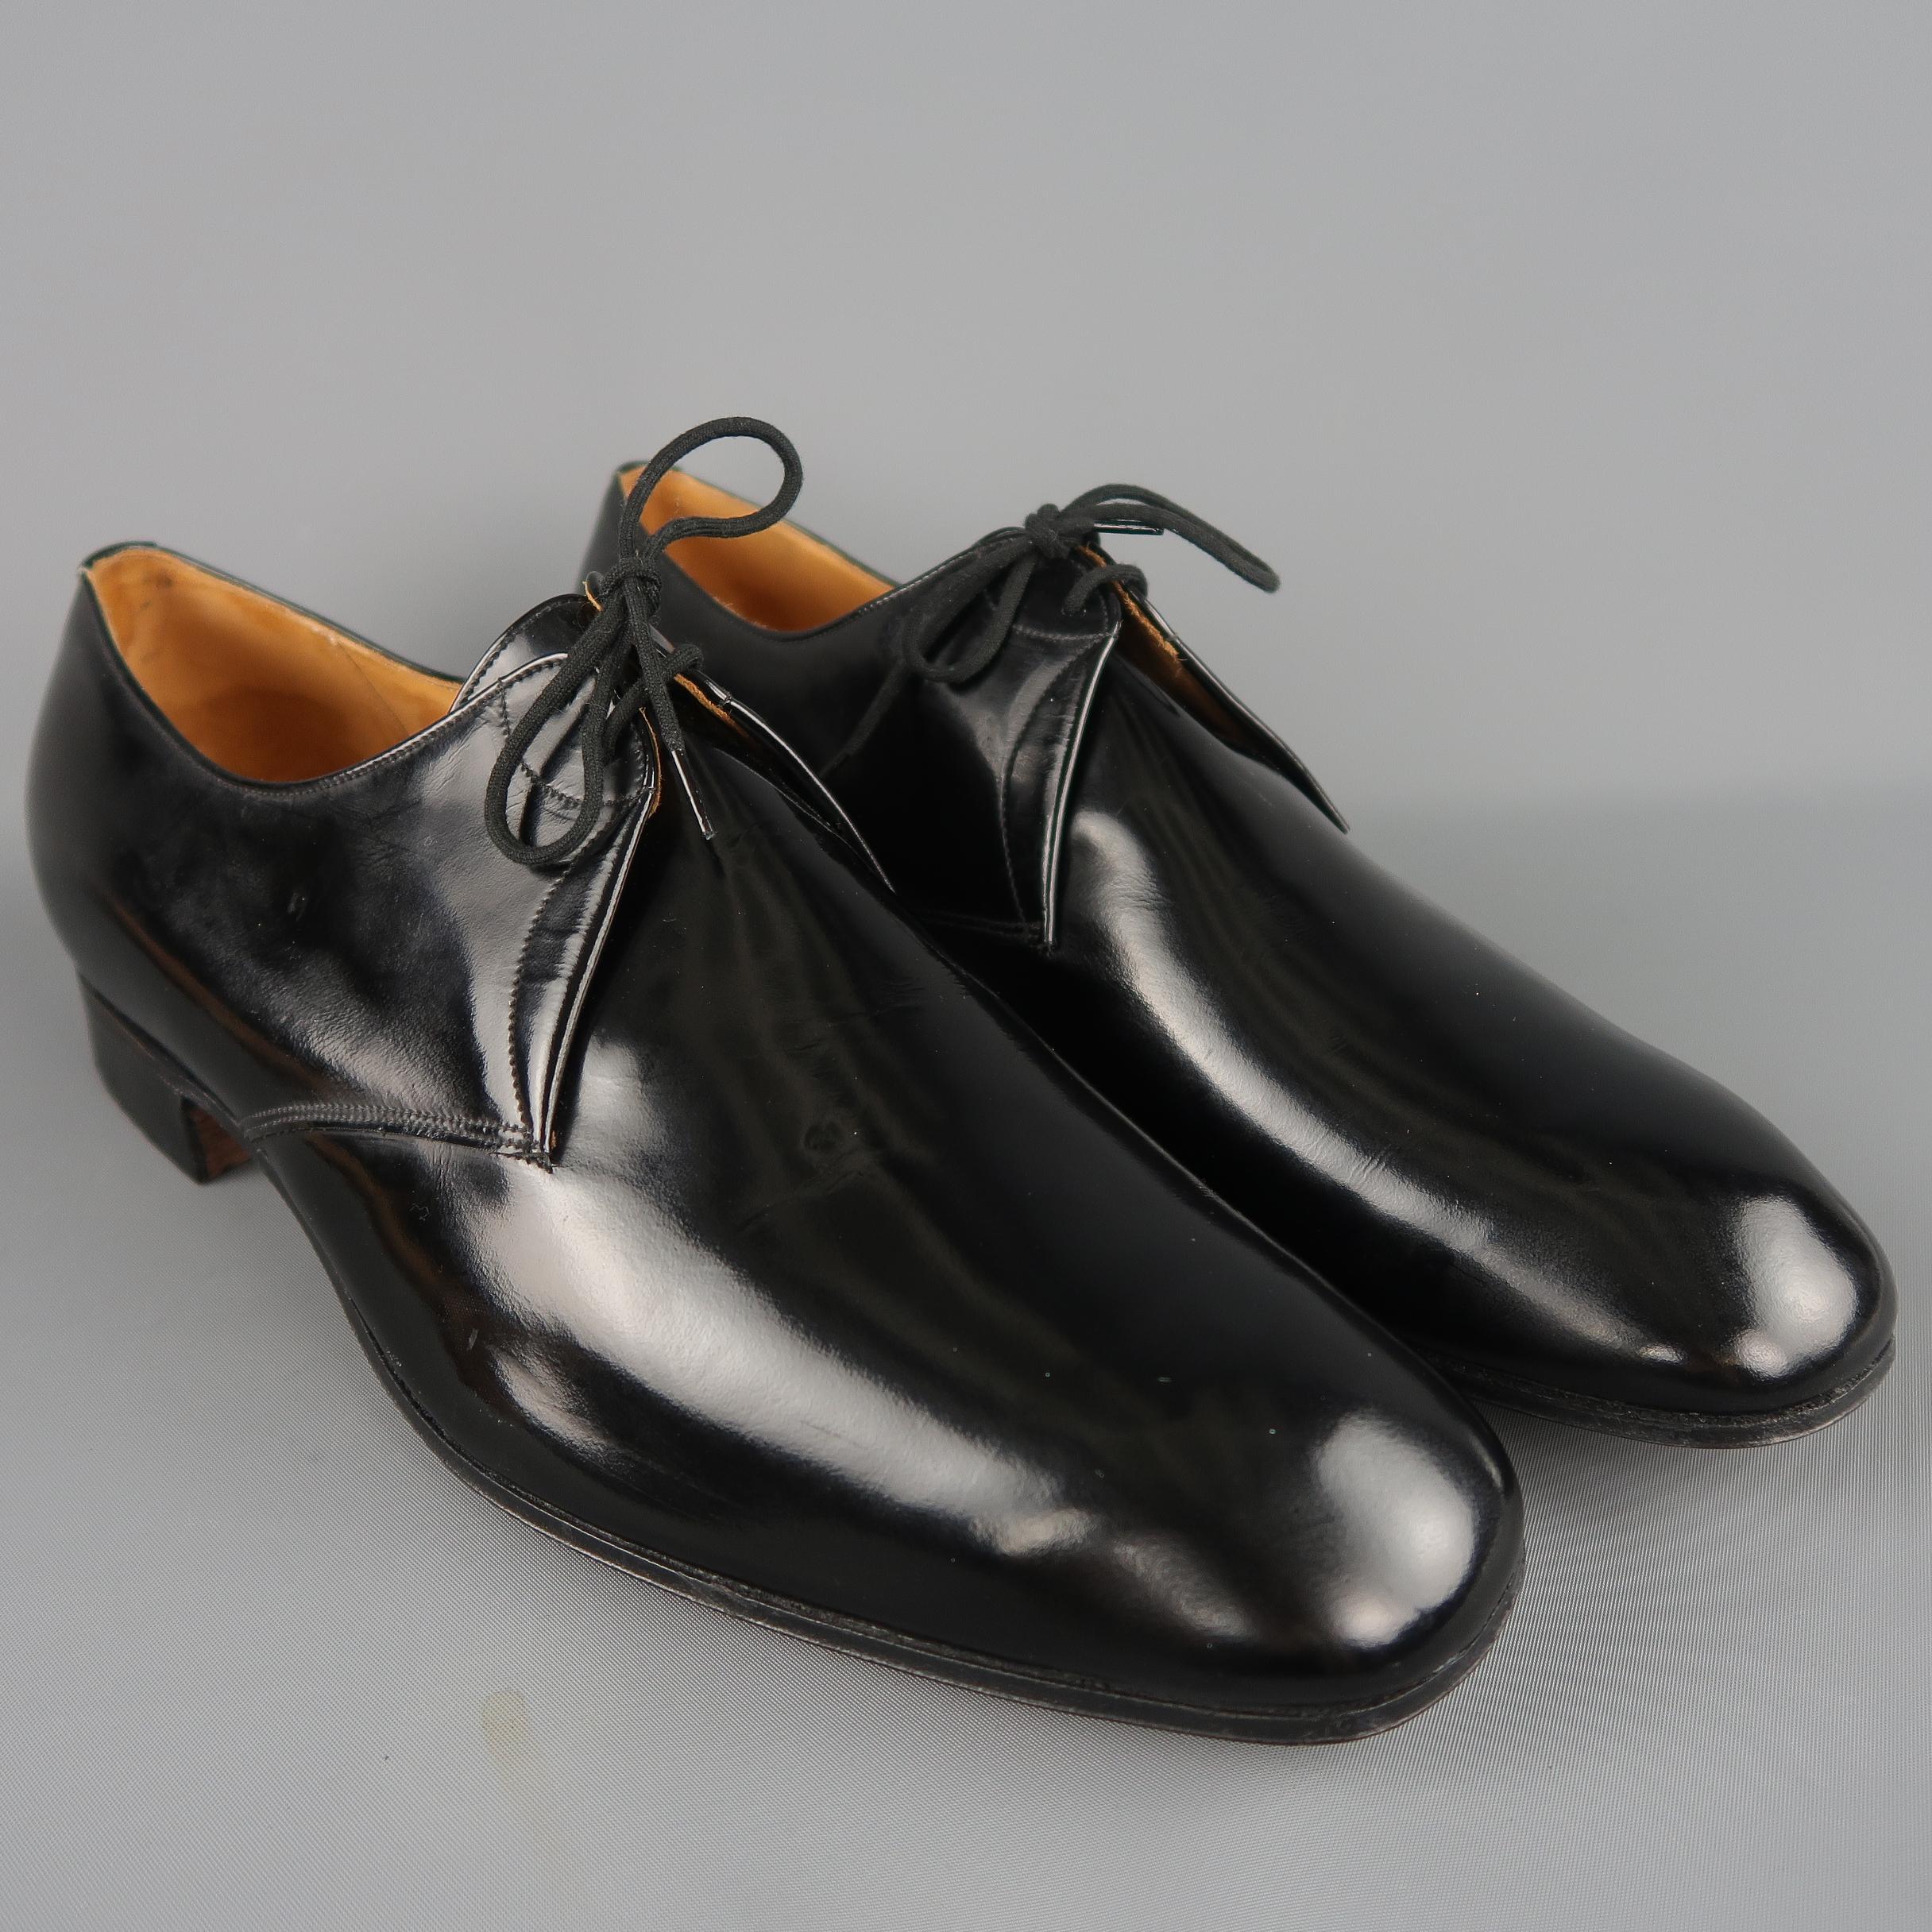 CHURCH'S derby dress shoes come in black patent leather with a tapered square toe. With shoe trees. Made in England.
 
New with Tags.
Marked: 13 D